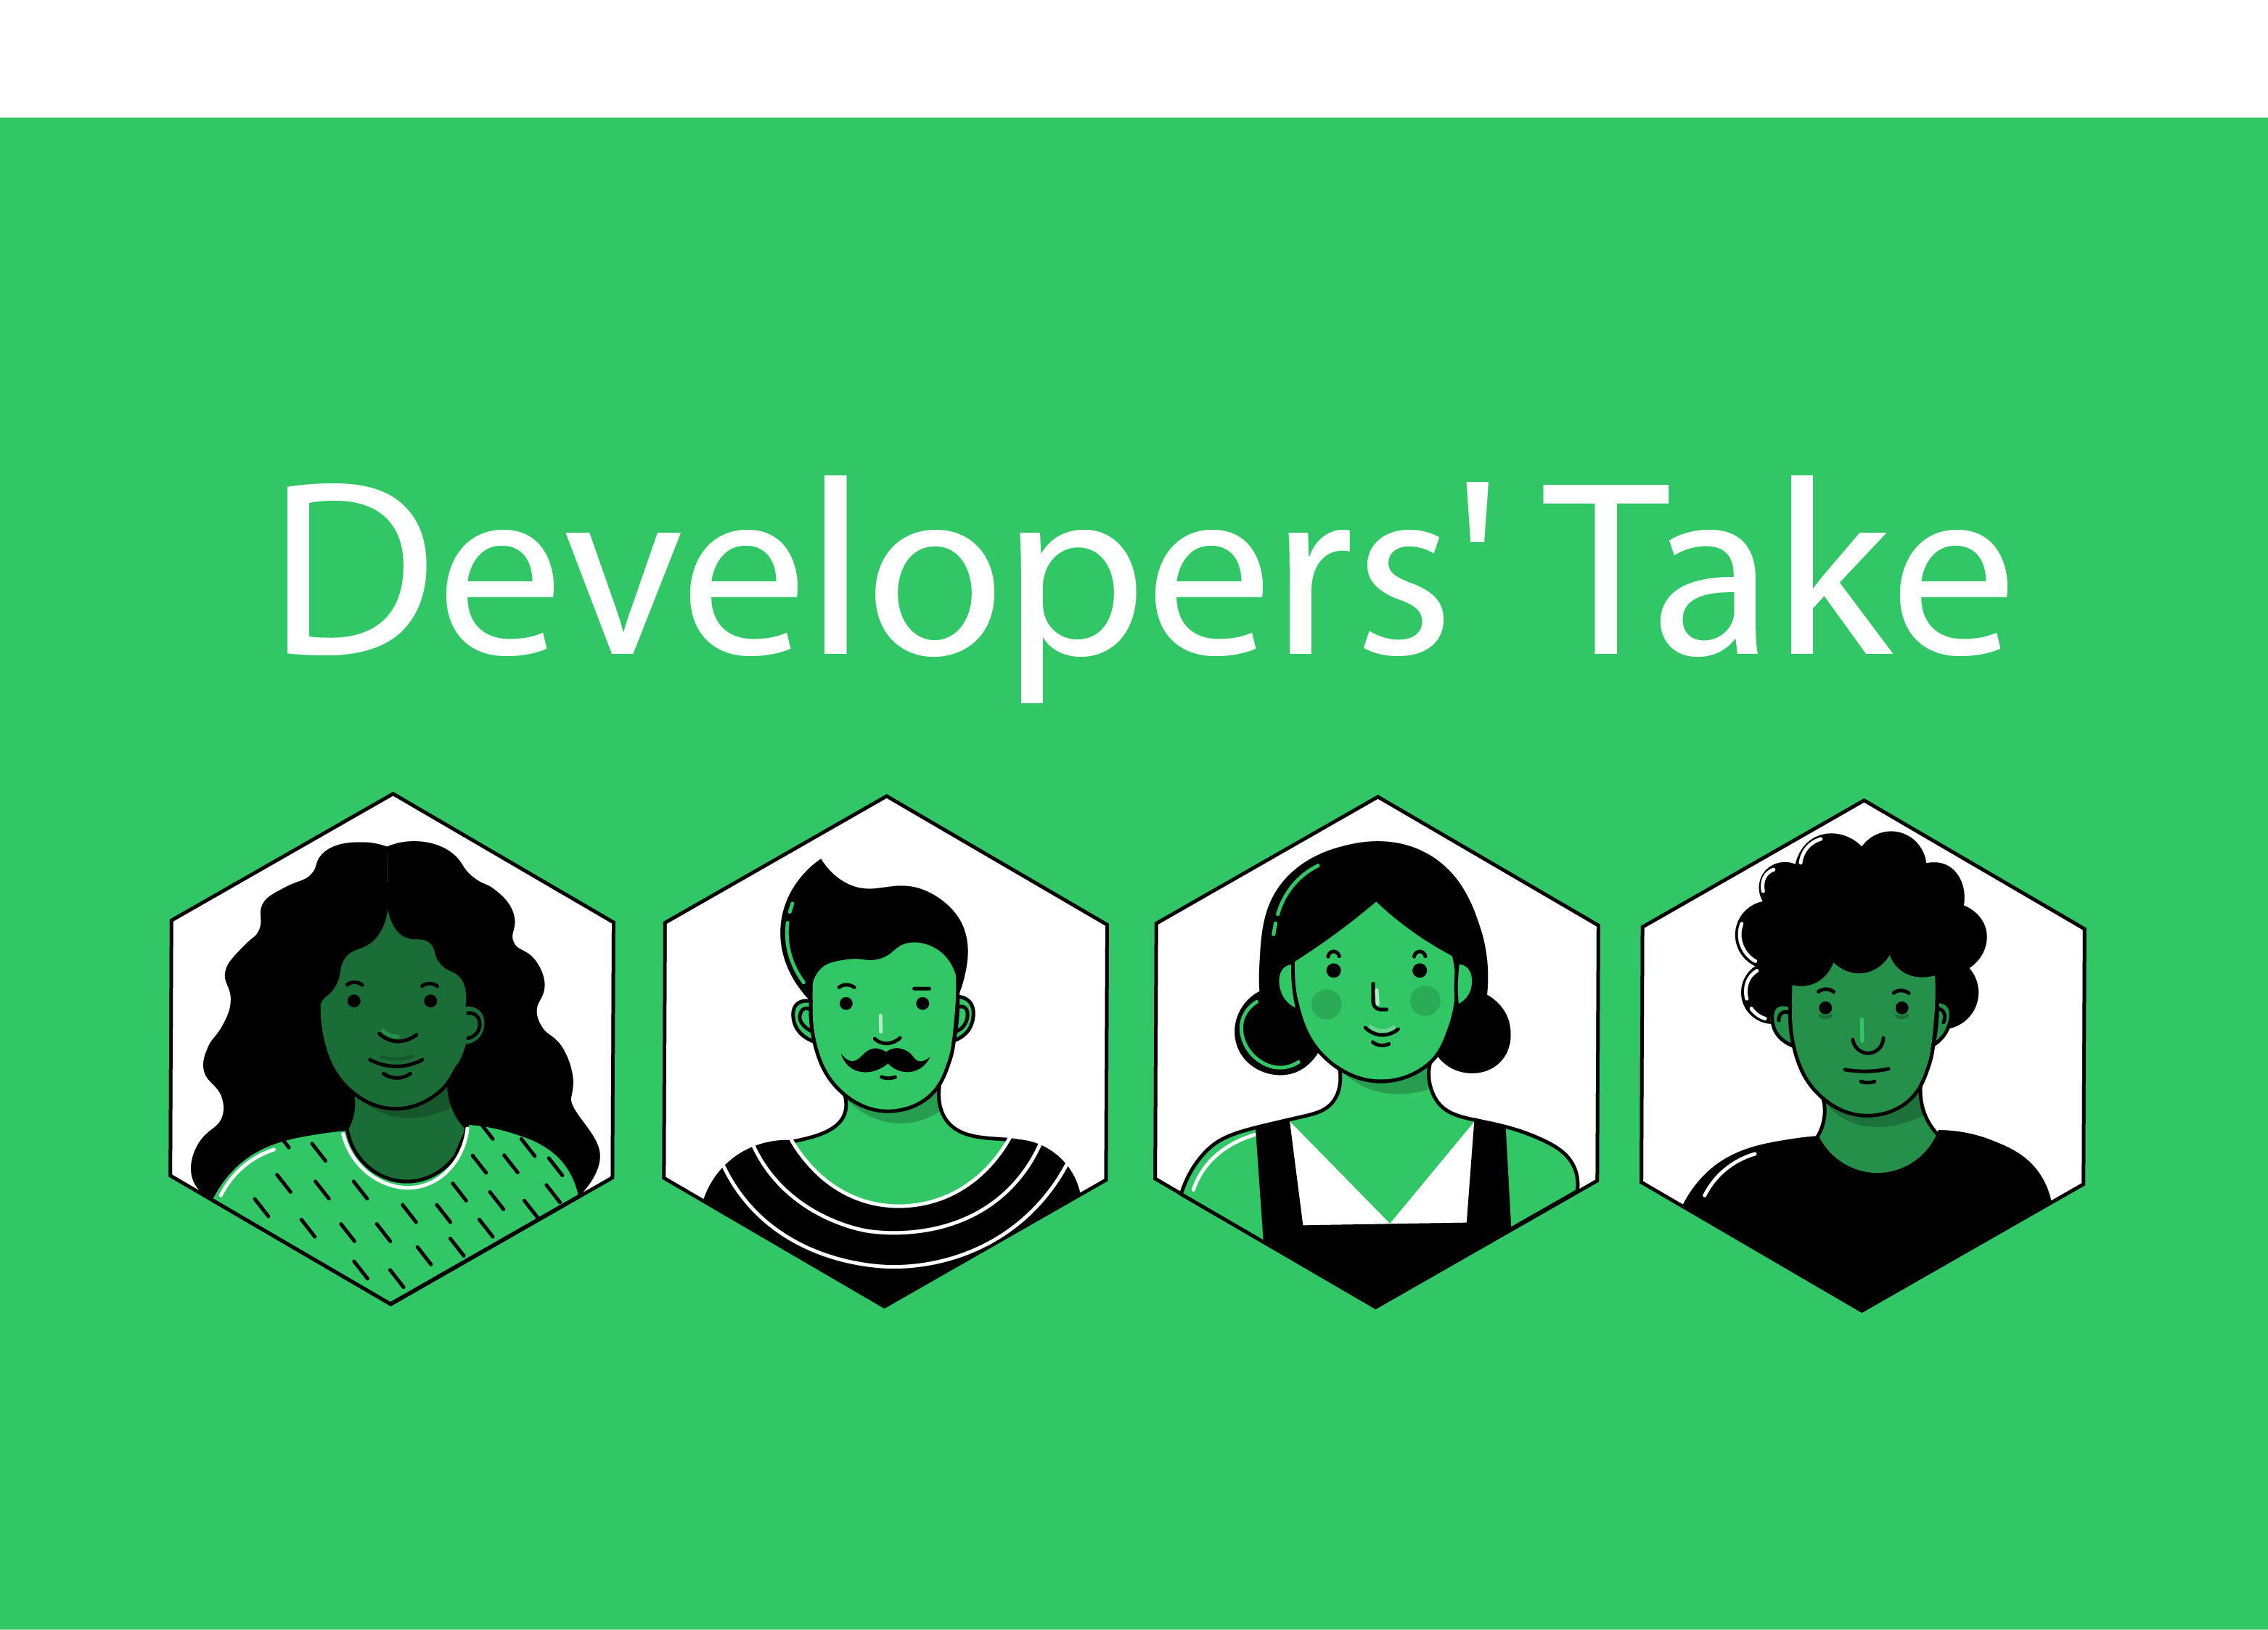 Illustration of four diamond-shaped headshots with the words "Developers' Take" written on top